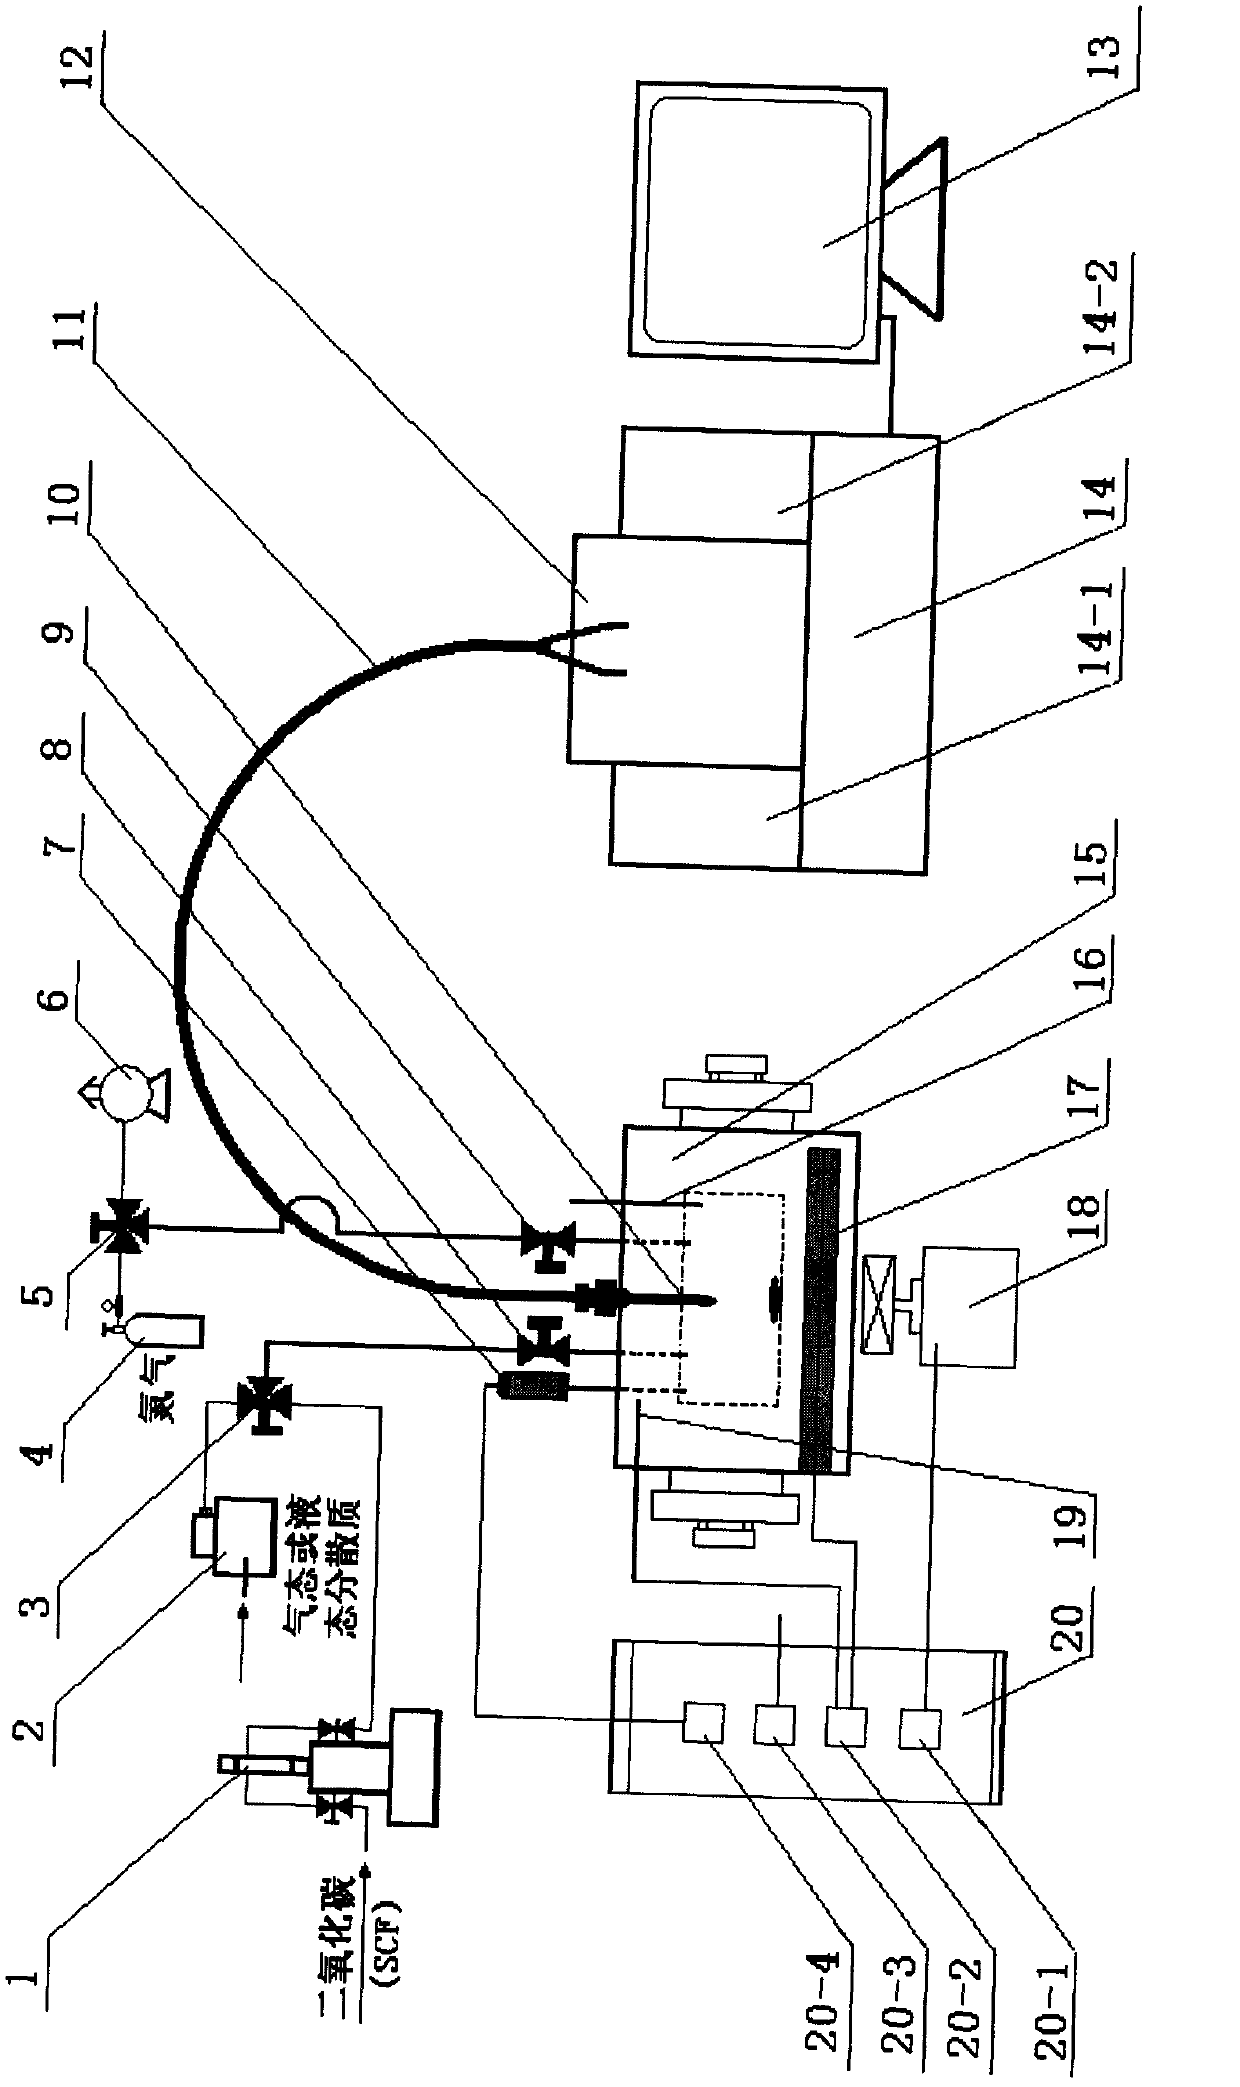 High-pressure in-situ infrared spectroscopy apparatus for monitoring supercritical system on line